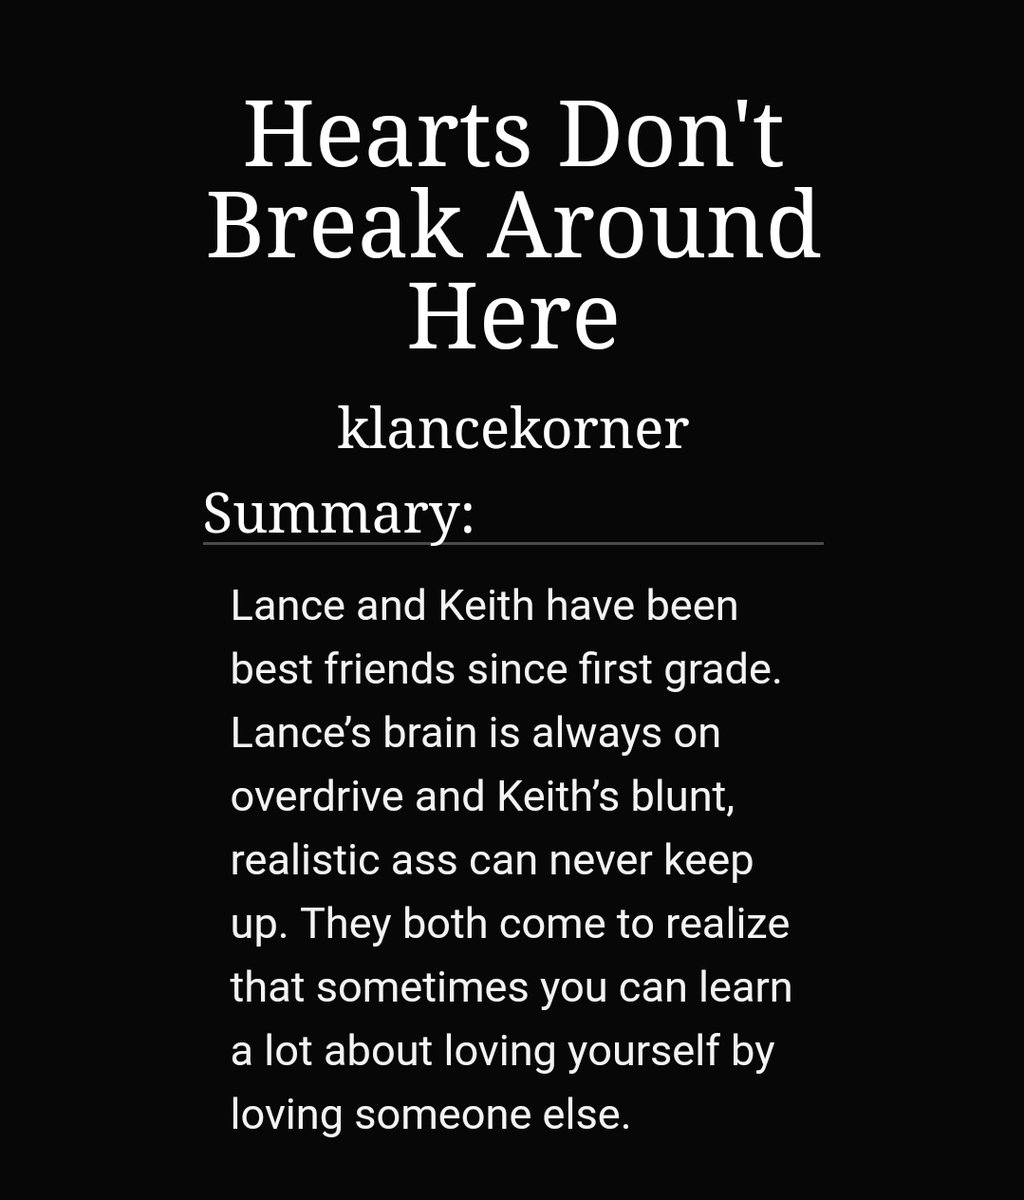 hearts don't break around here by klancekorner  https://archiveofourown.org/works/12402426/chapters/28220805-13/13-klance-childhood bestfriends to lovers aka my fave trope-so much pinning-one of my faves-i enjoyed it so so much